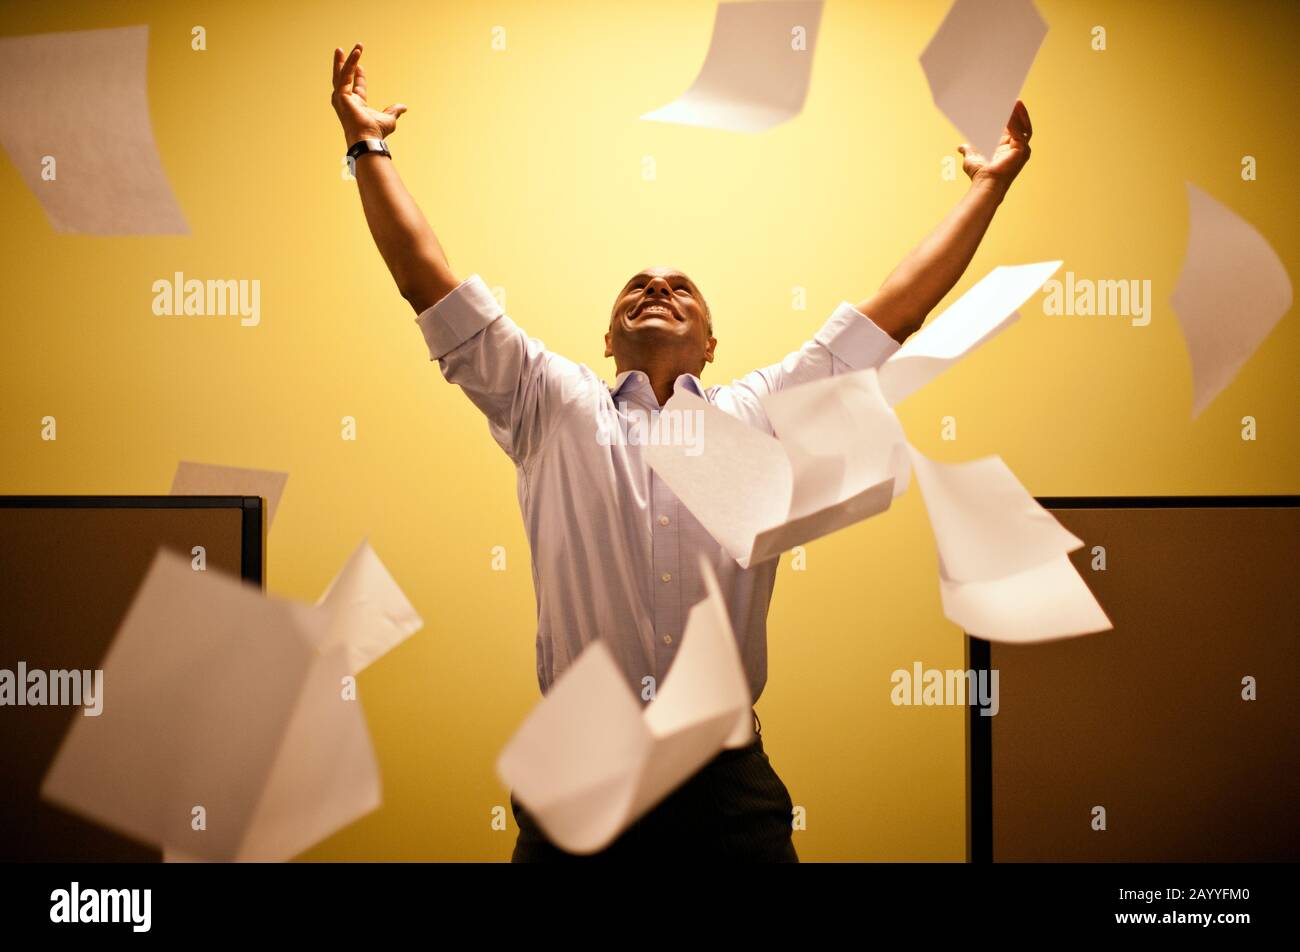 Man shouts throwing paper into the air arms raised. Stock Photo